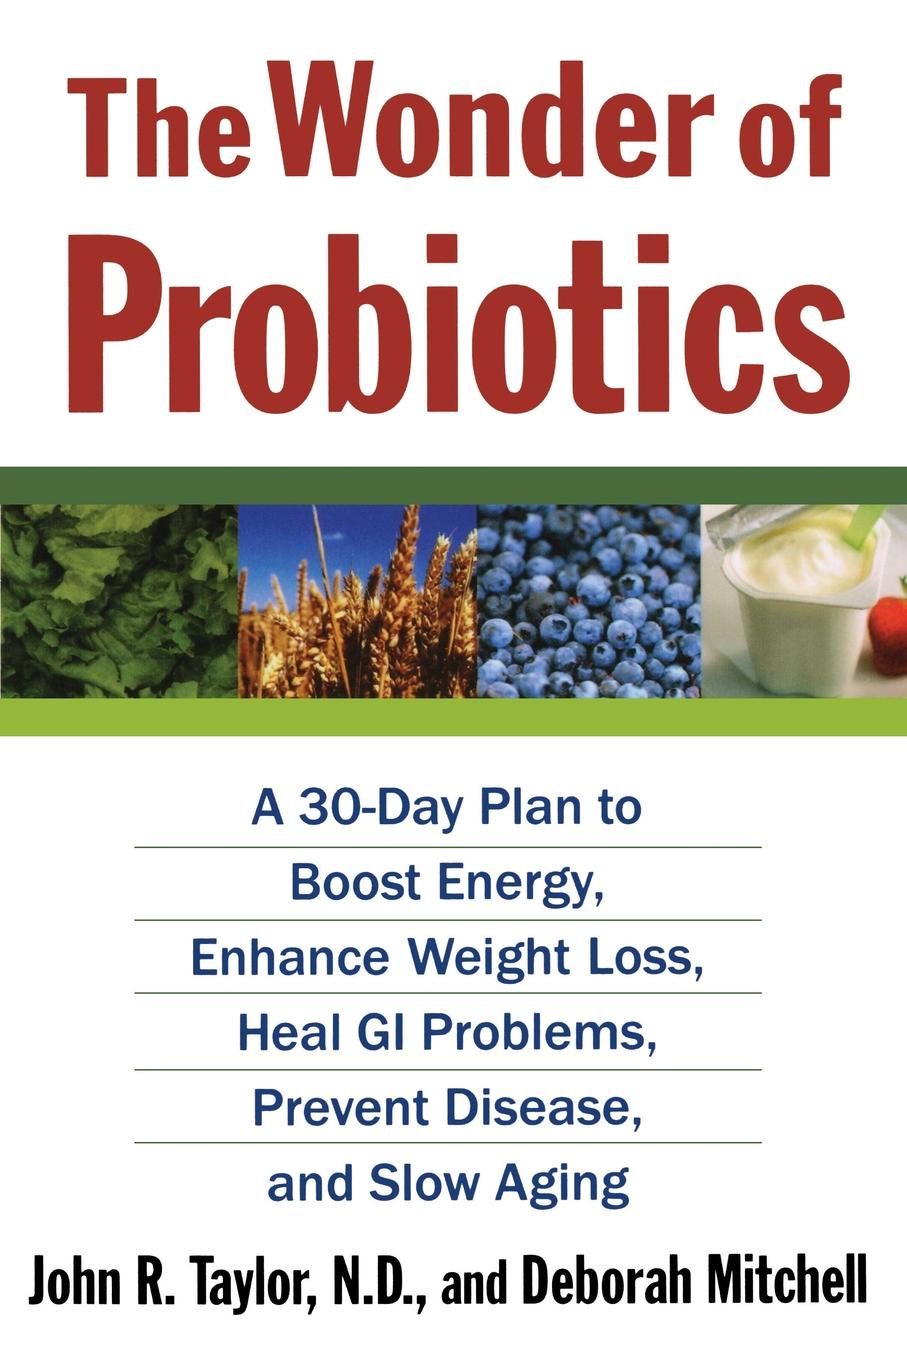 The Wonder of Probiotics. A 30-Day Plan to Boost Energy, Enhance Weight Loss, Heal GI Problems, Prevent Disease, and Slow Aging